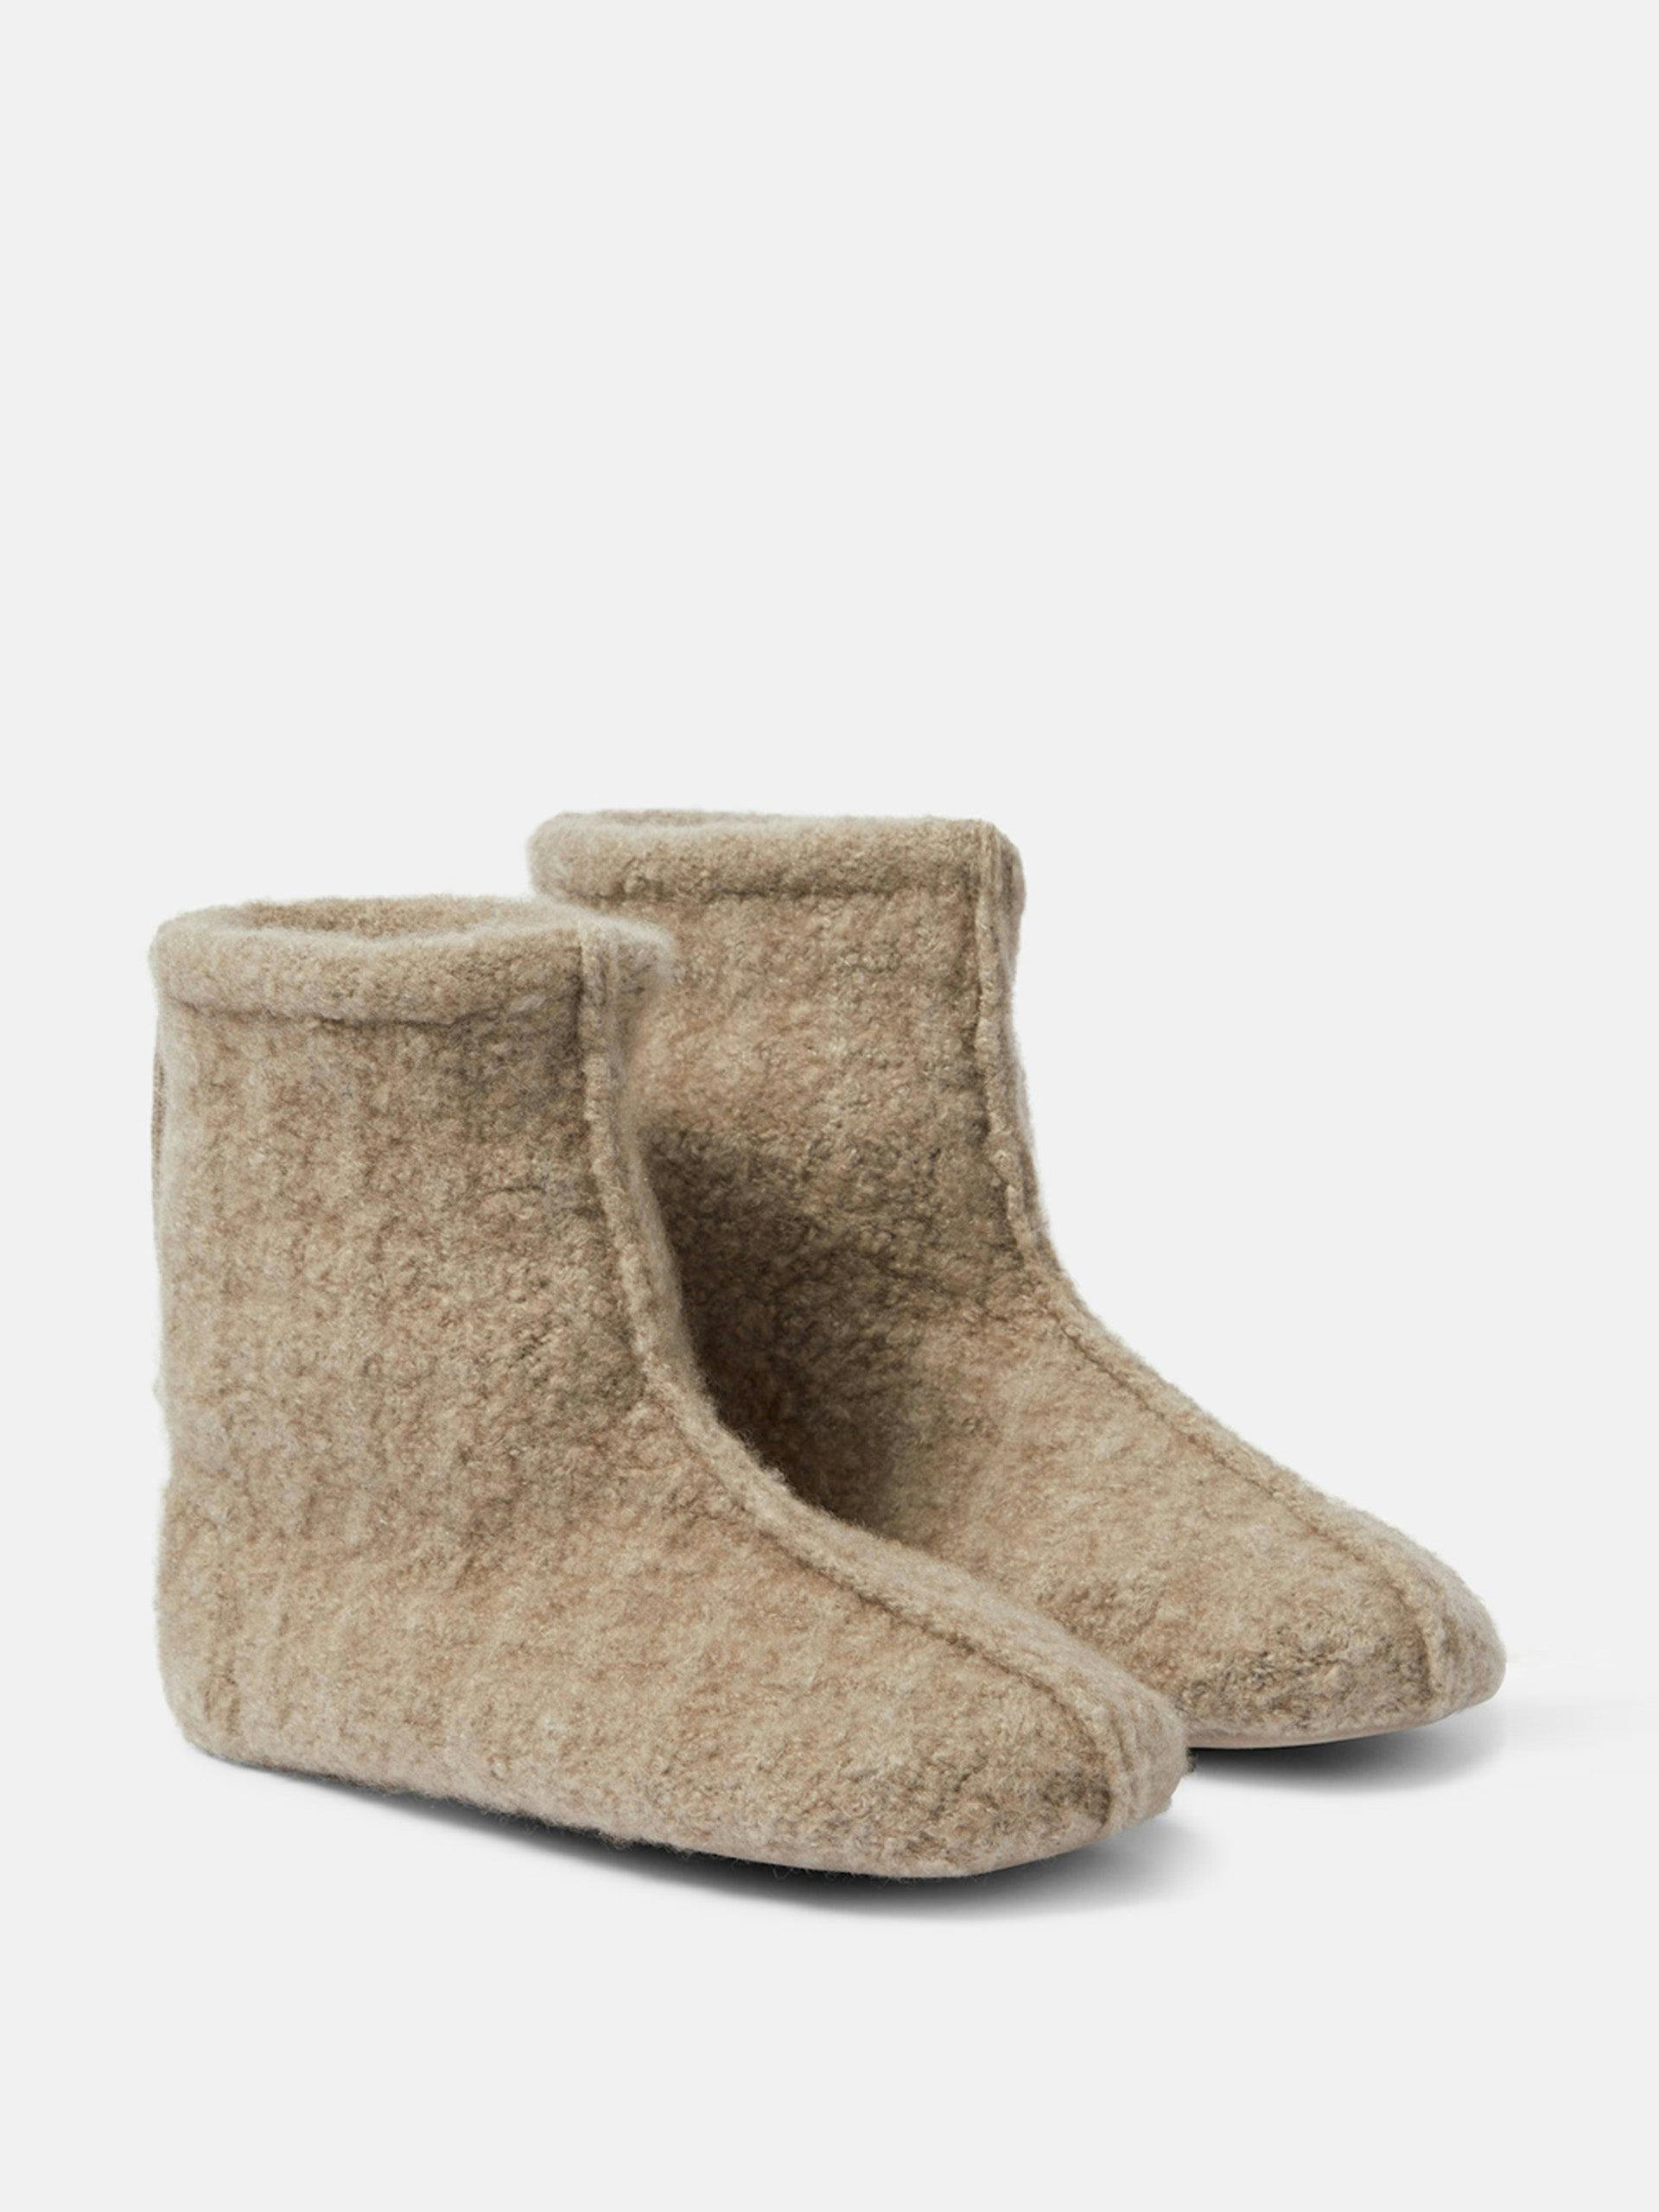 Cashmere slippers